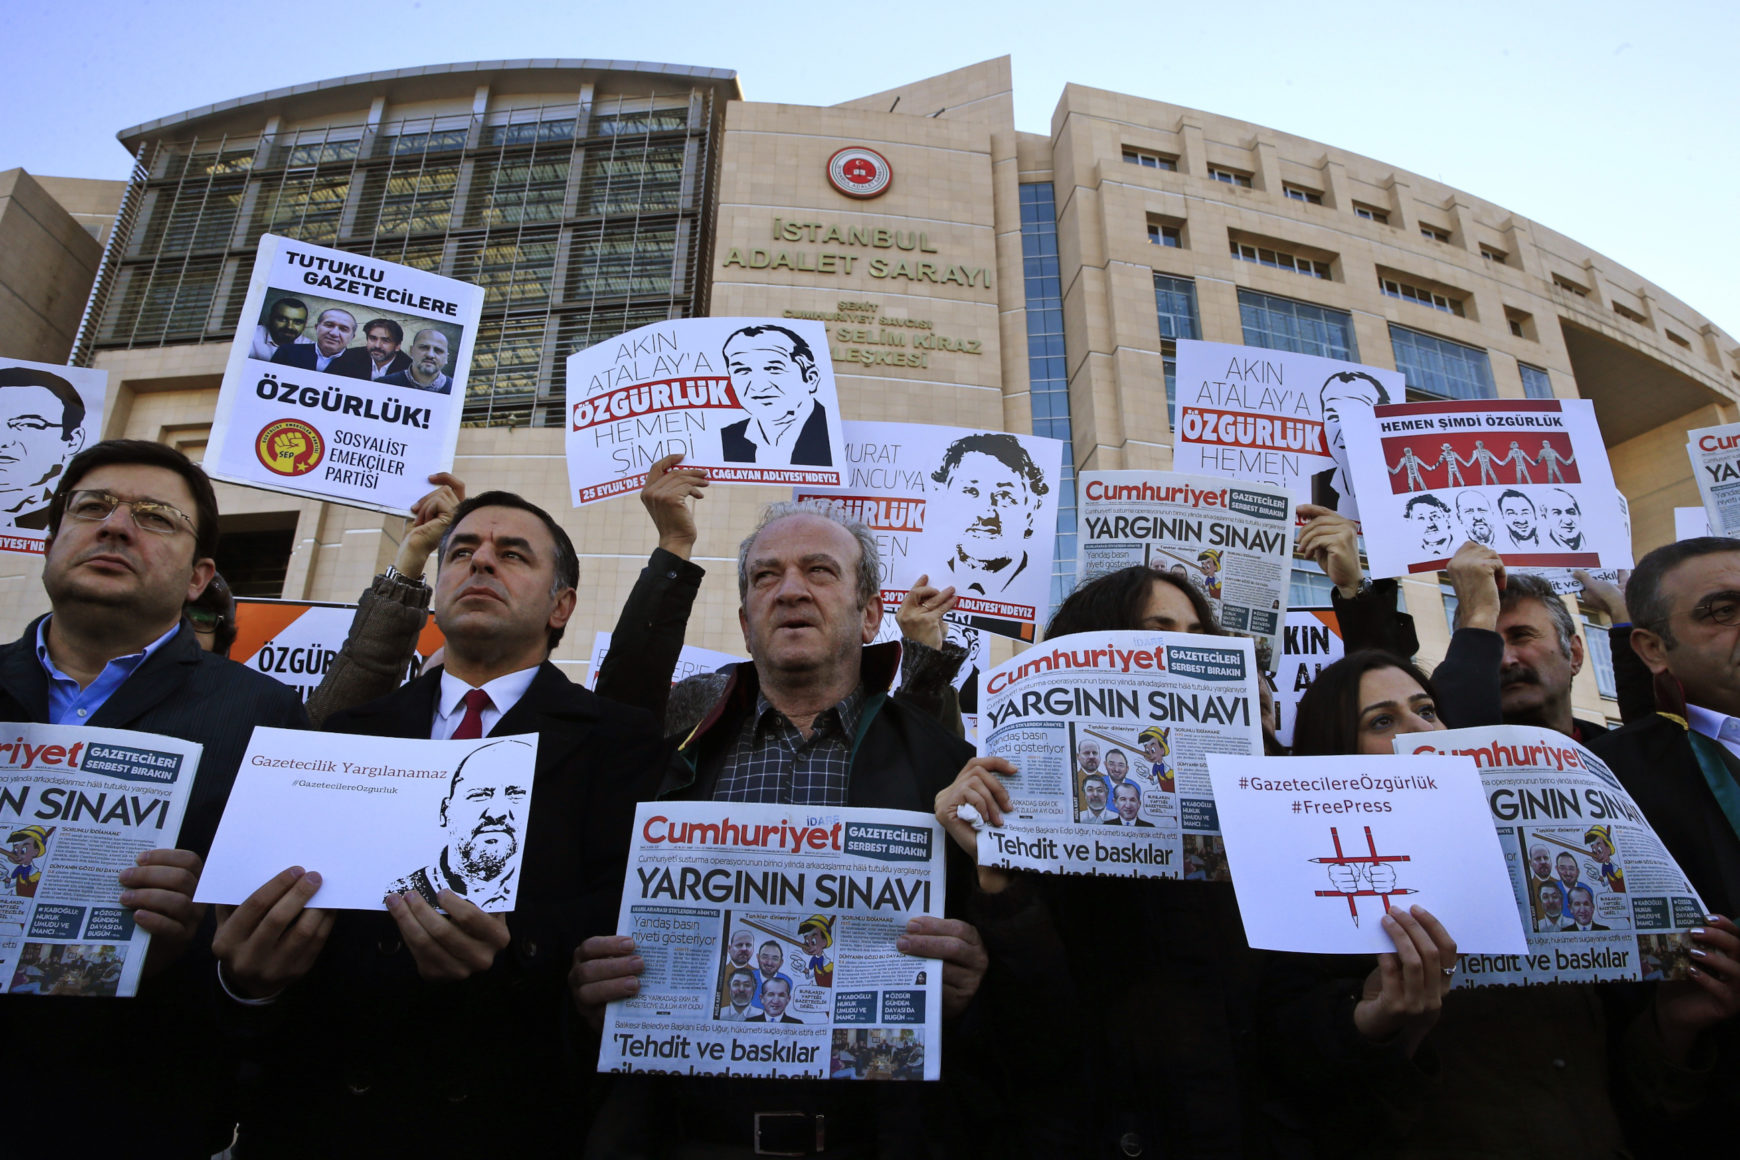 People hold signs in a protest outside a Turkish court house